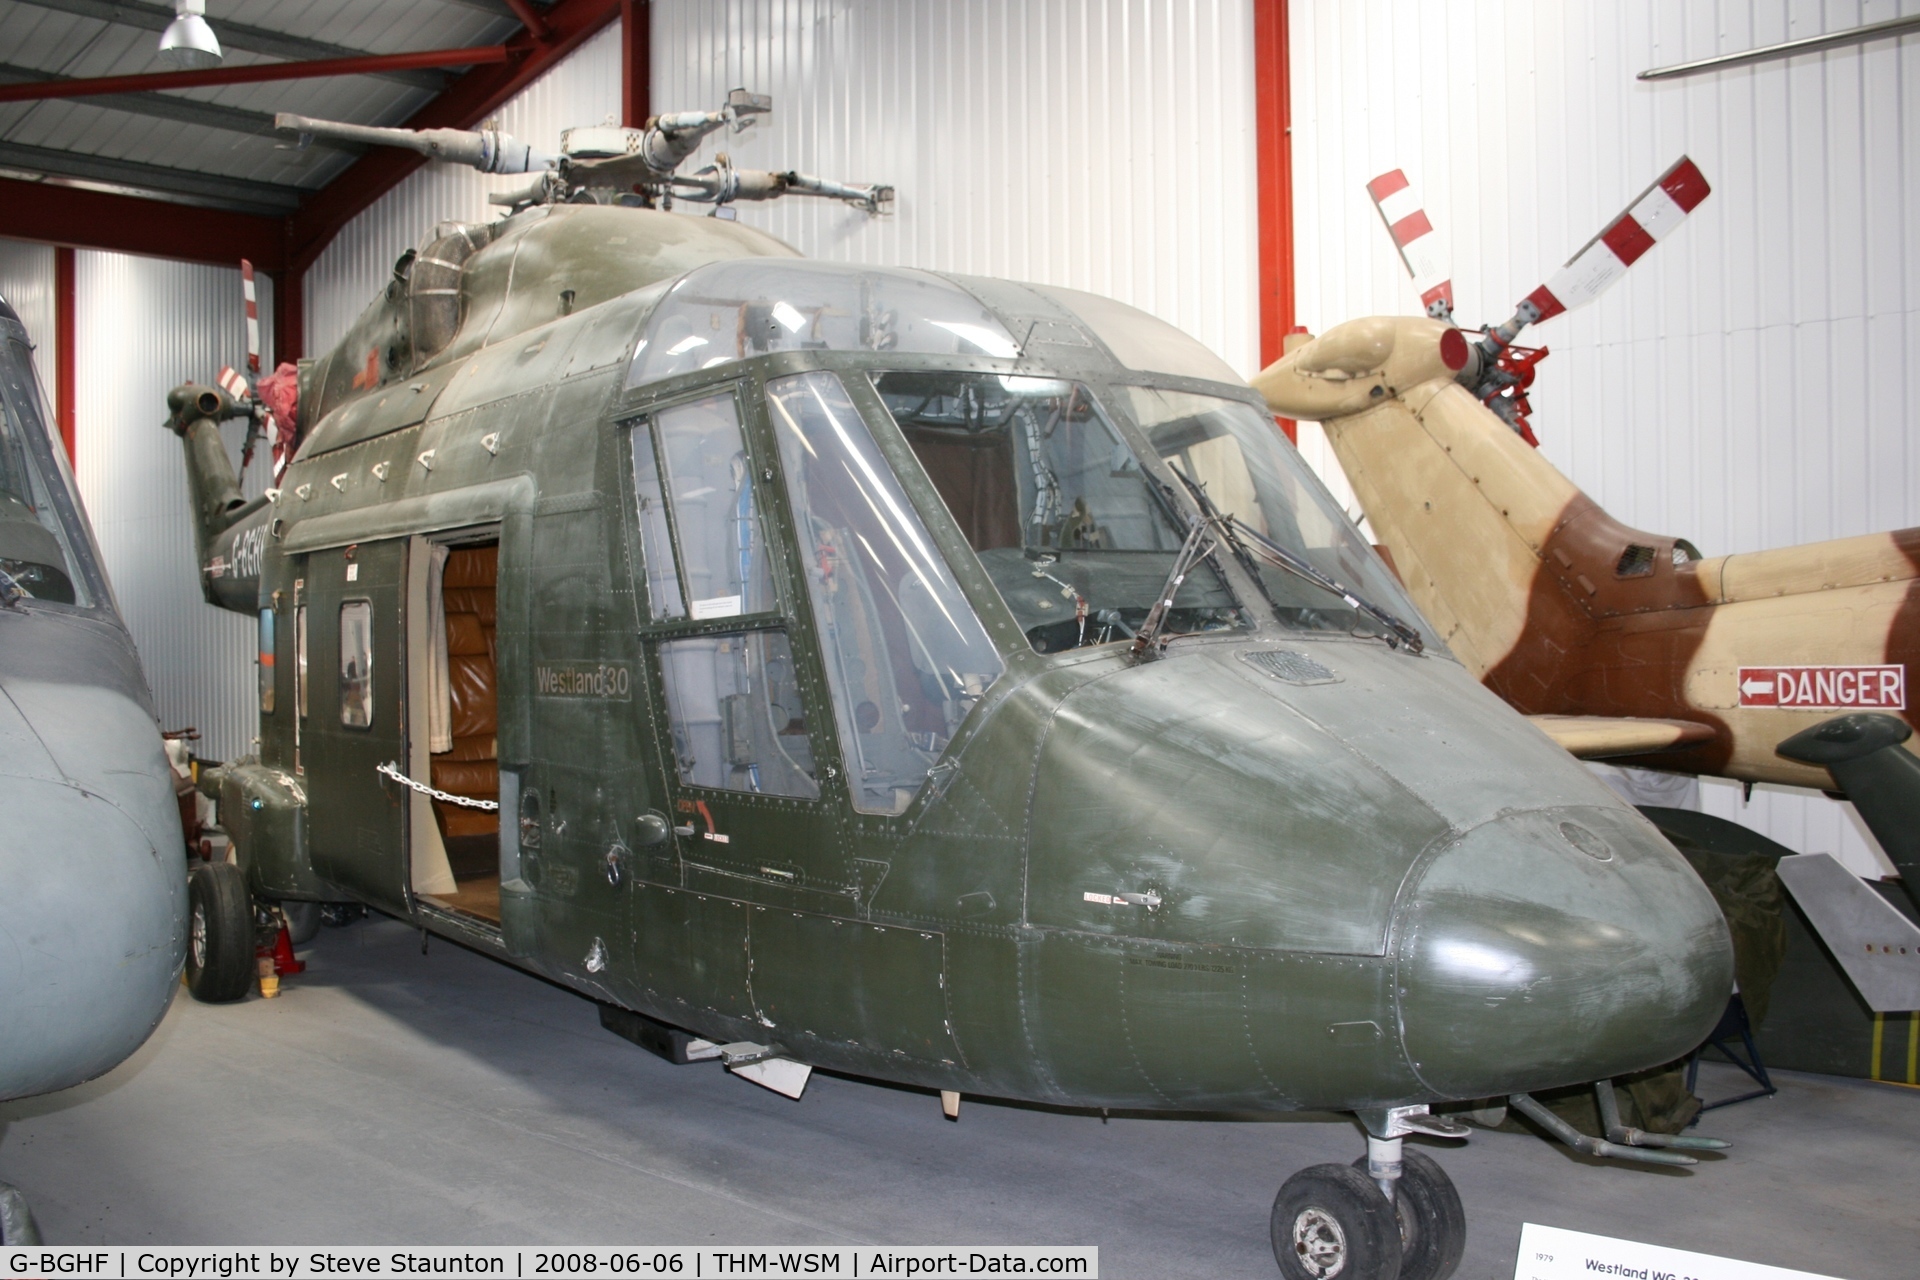 G-BGHF, 1977 Westland WG-30-100-60 C/N WA-001 P, Taken at the Helicopter Museum (http://www.helicoptermuseum.co.uk/)